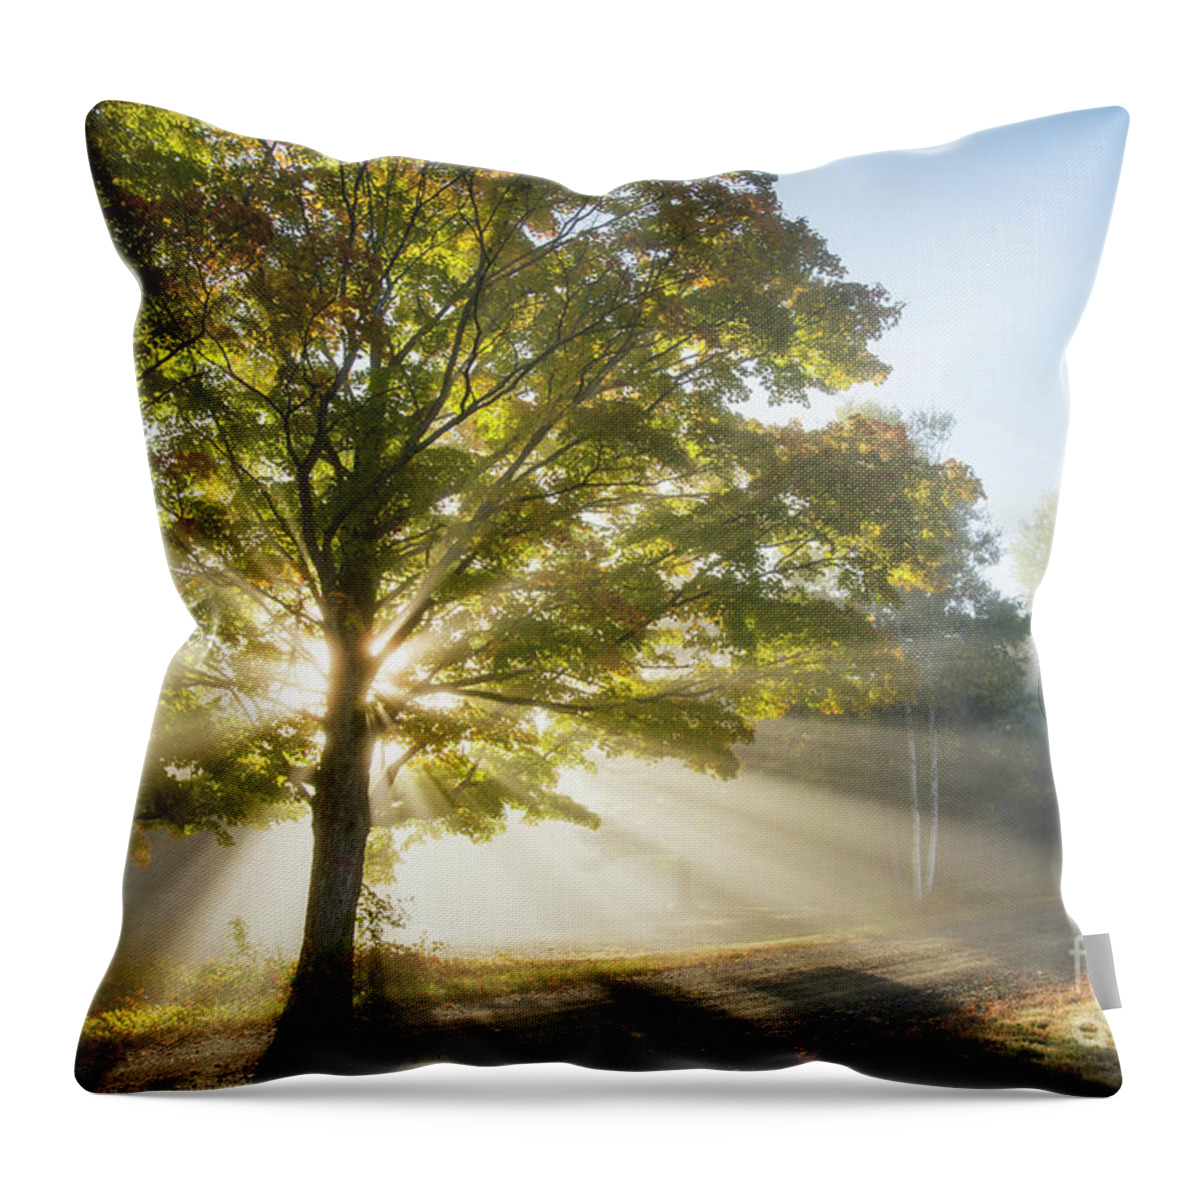 Morning Light Rays Throw Pillow featuring the photograph Country Road by Alana Ranney